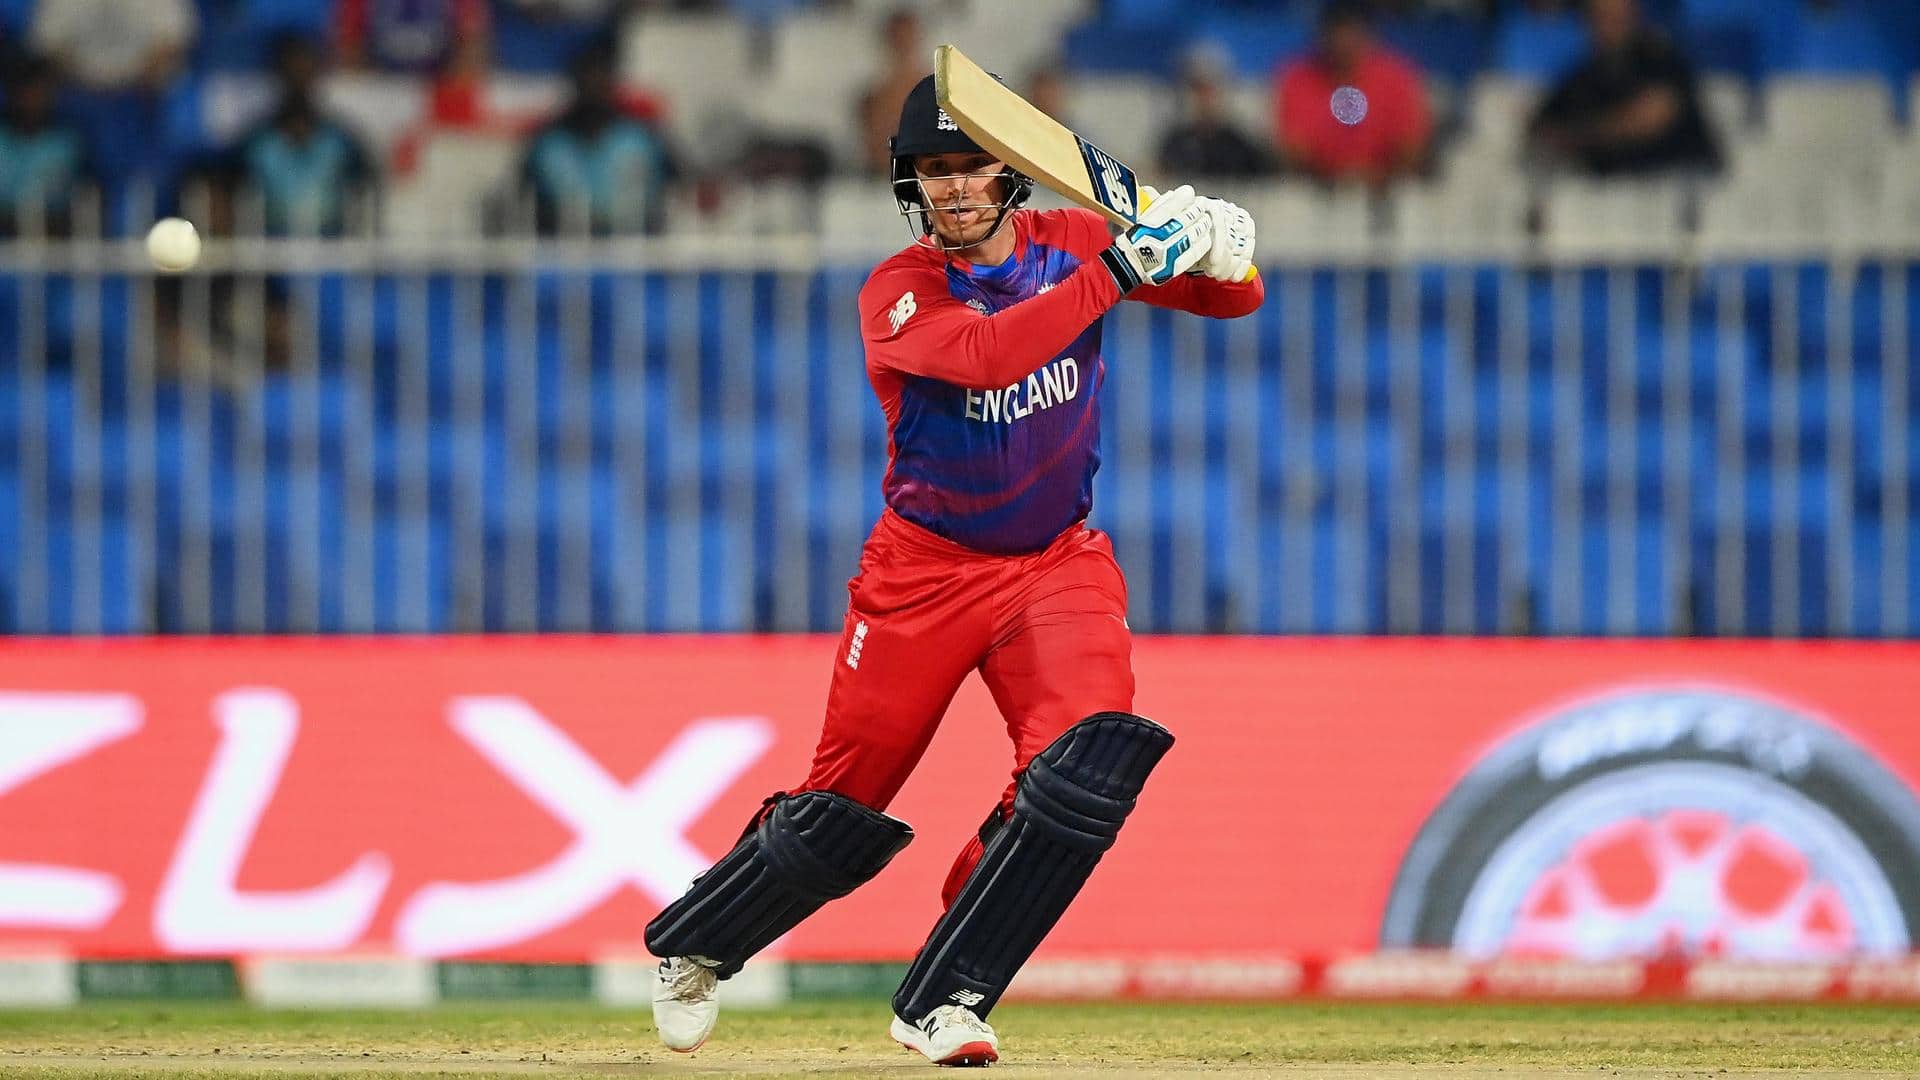 KKR sign Jason Roy as replacement player: Decoding his stats